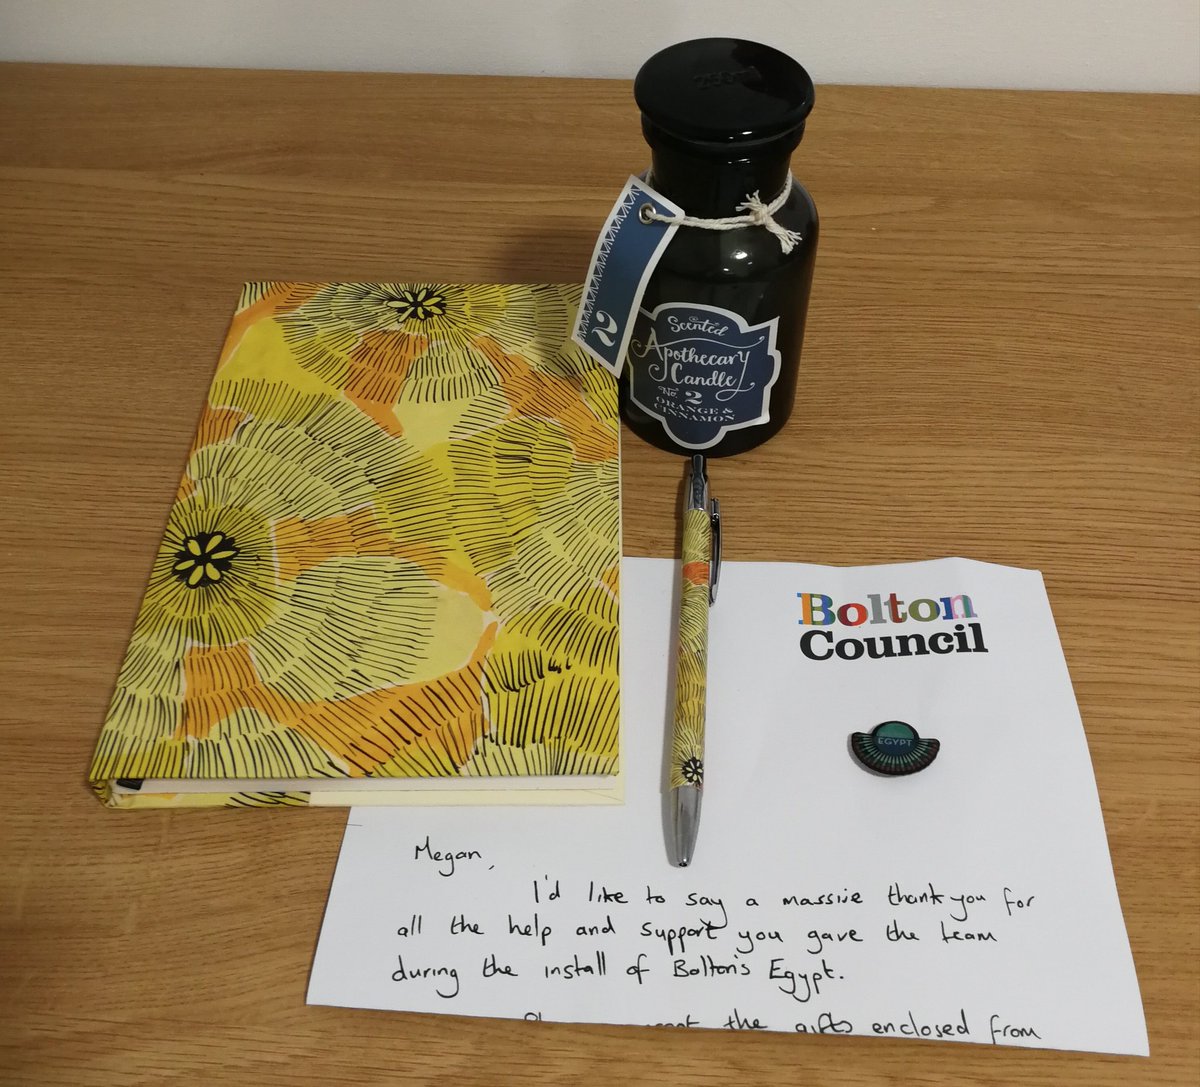 Very touched to have received a gift parcel from the #BoltonsEgypt team after helping in the installation of their new #AncientEgypt gallery. It really was a pleasure to work alongside such a fab team, and cannot wait to start wearing my new Bolton's Egypt pin! ☺️ 🎁